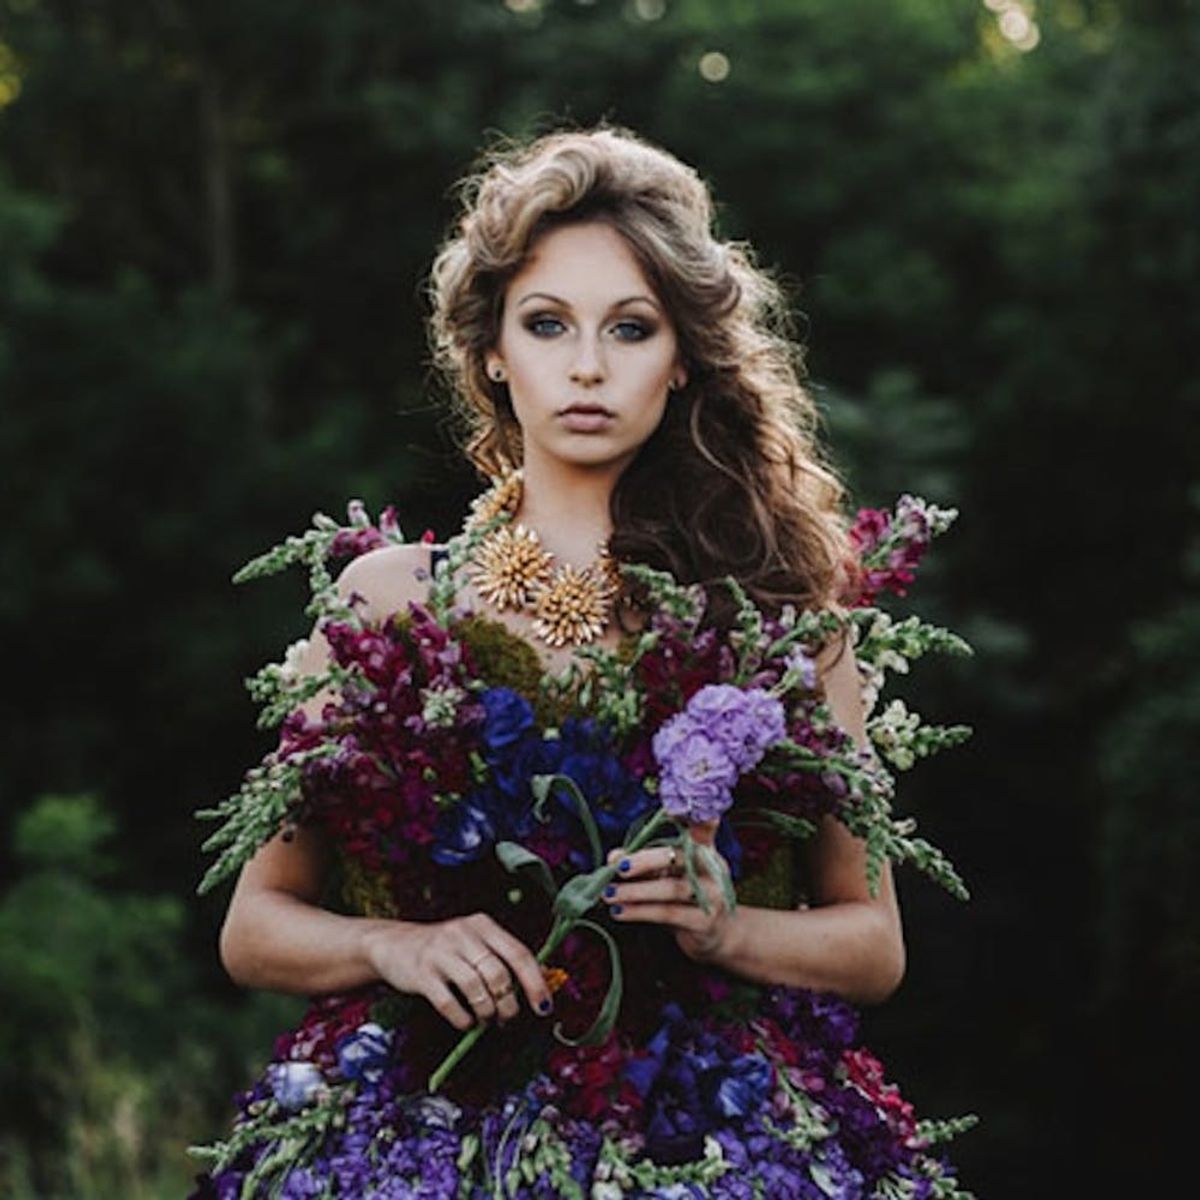 This Fairytale Gown Is Made Completely Out of Flowers